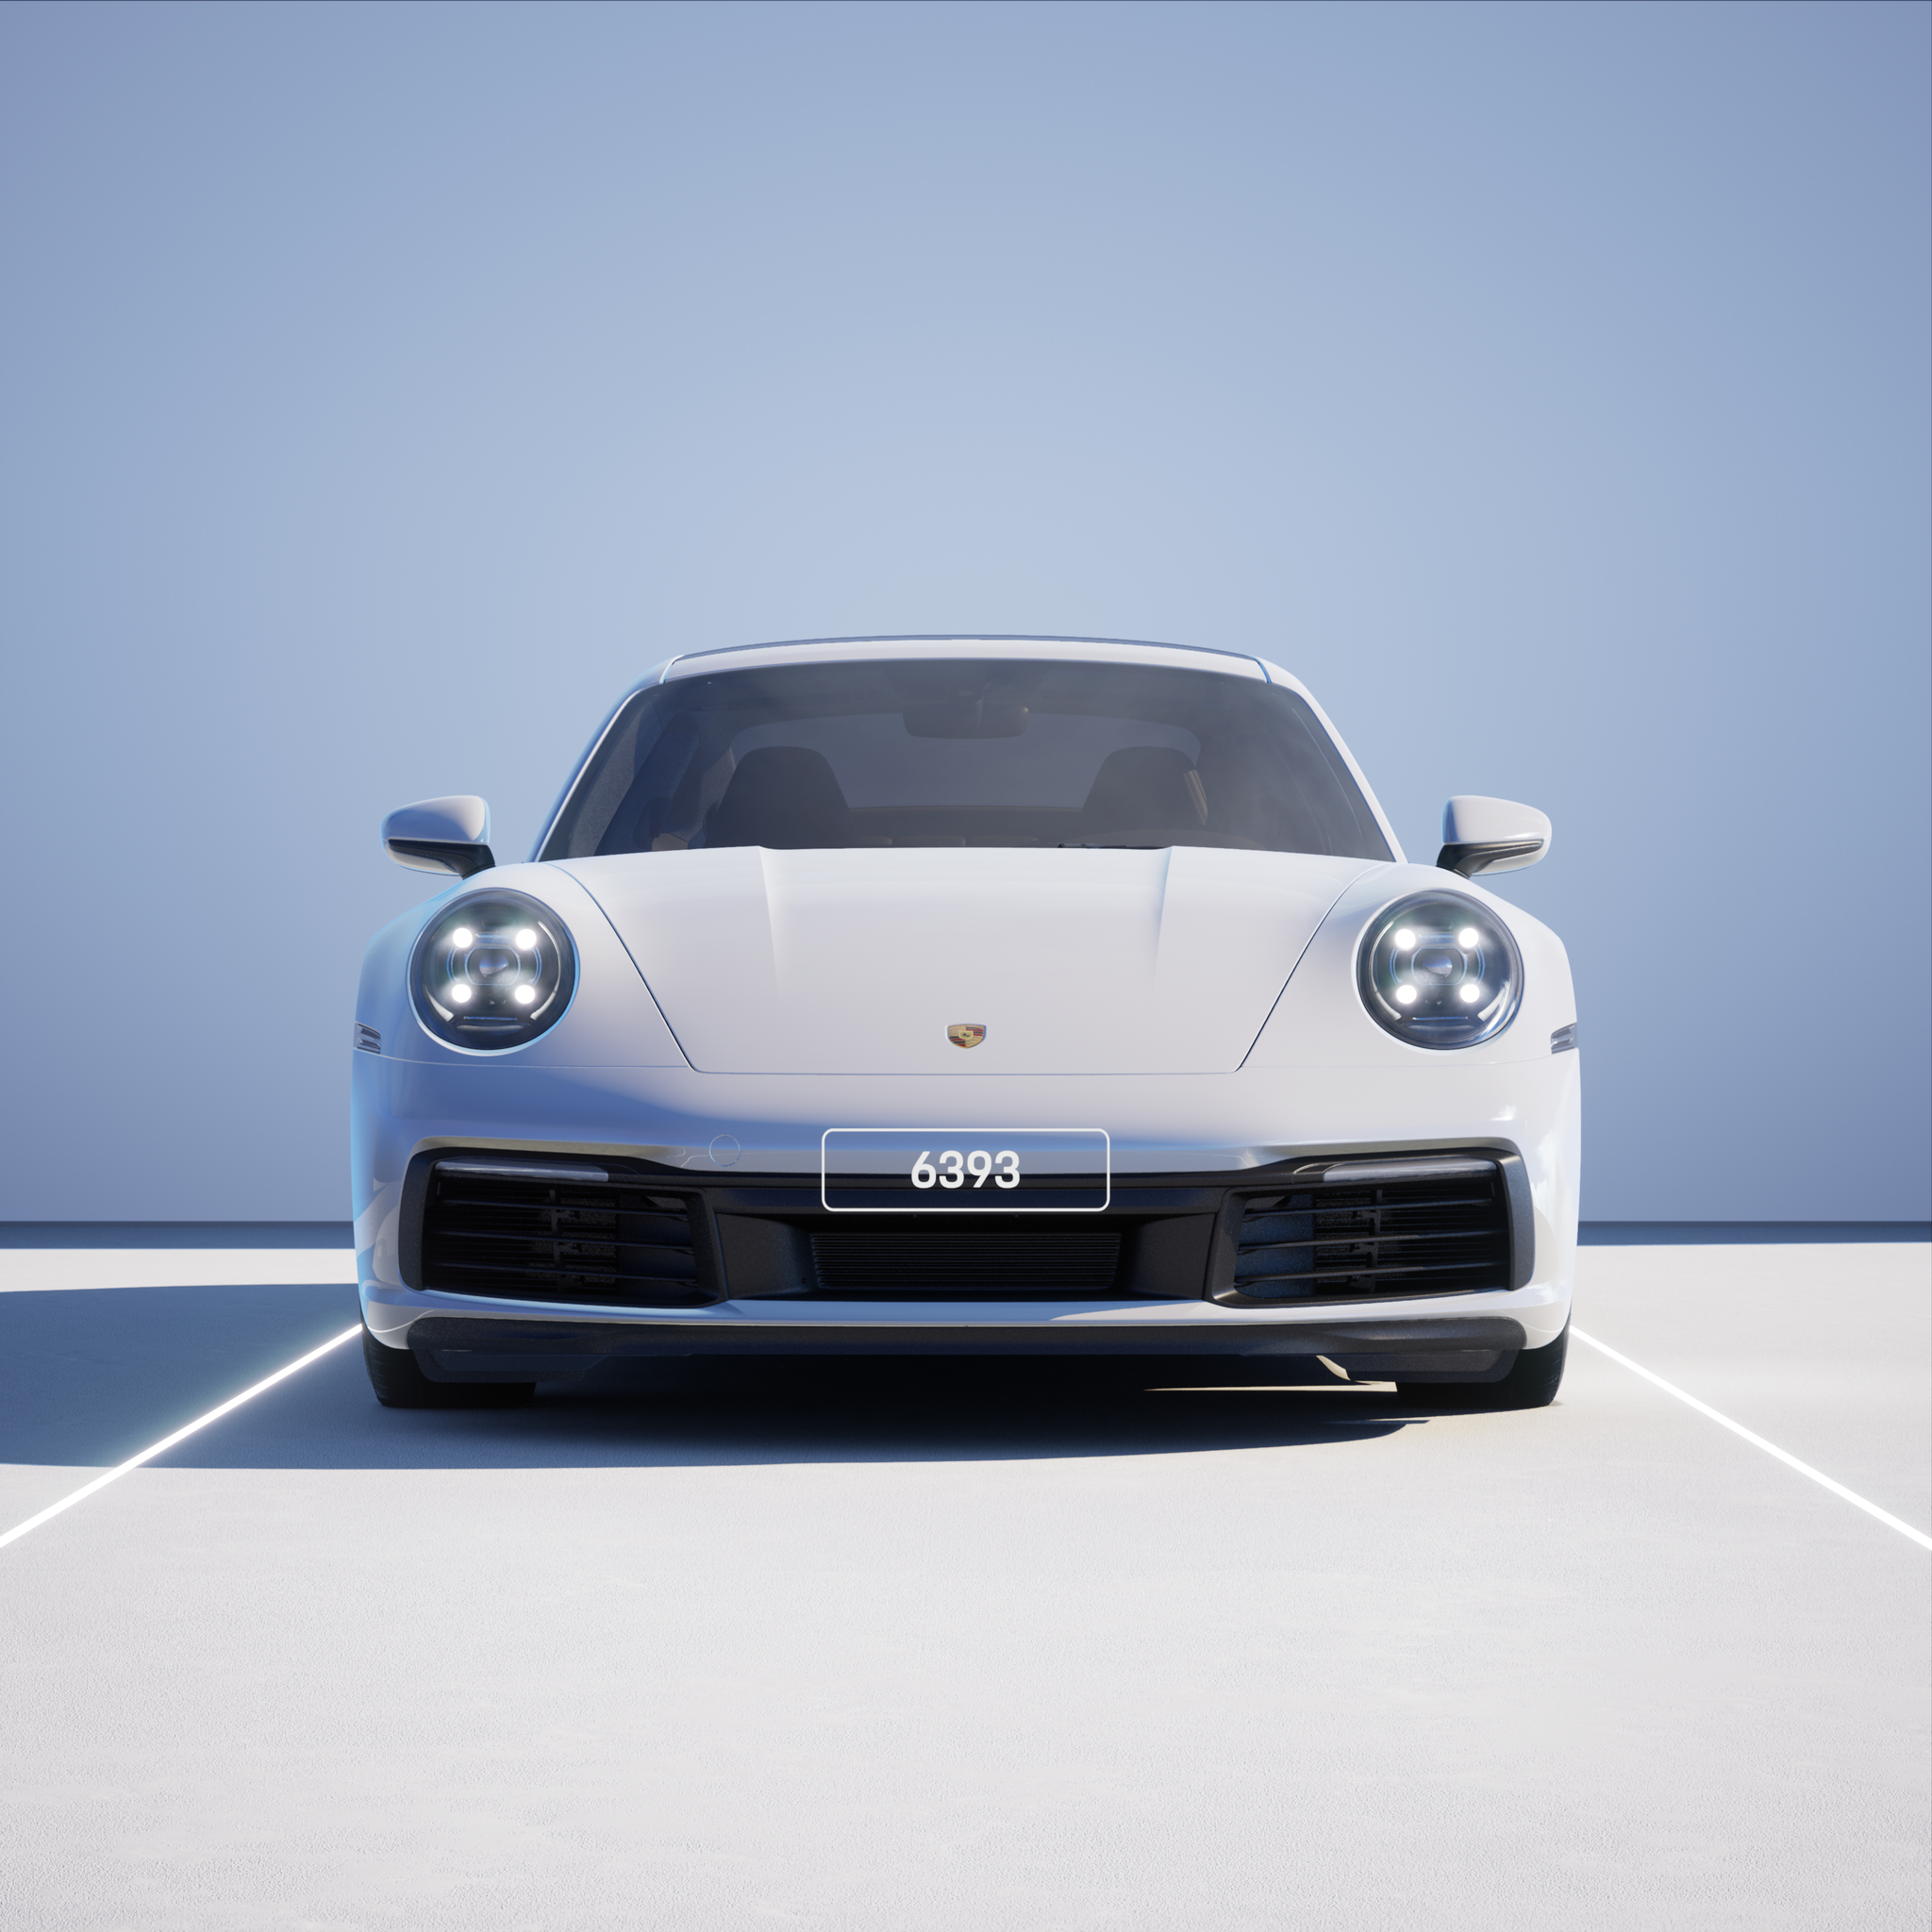 The PORSCHΞ 911 6393 image in phase